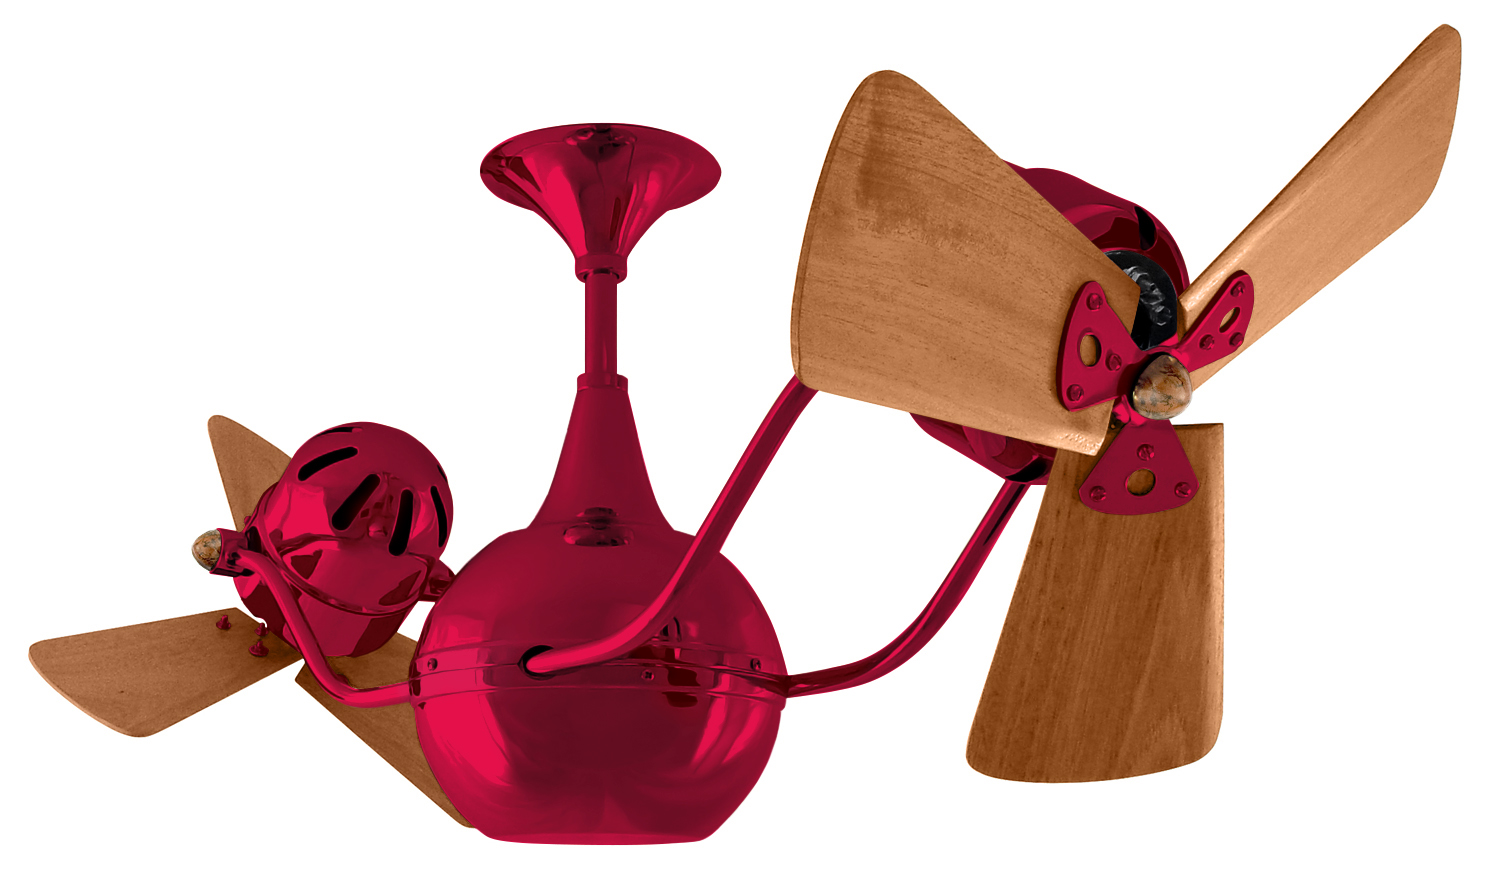 Vent-Bettina rotational dual head ceiling fan in Red / Rubi finish with solid Mahogany wood blades made by Matthews Fan Company.